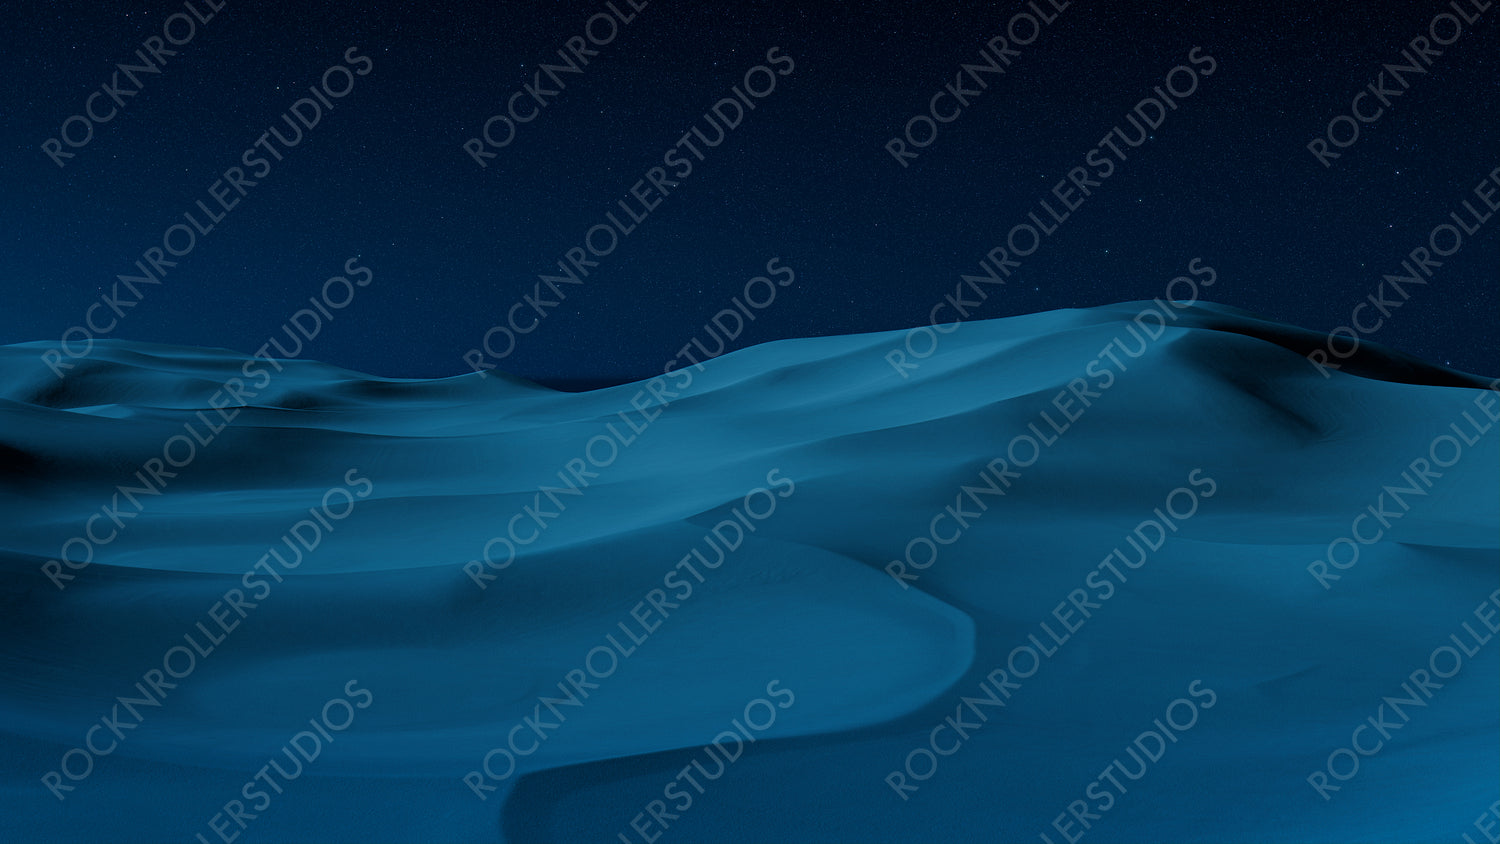 Night Landscape, with Desert Sand Dunes. Beautiful Contemporary Background with Blue Gradient Starry Sky